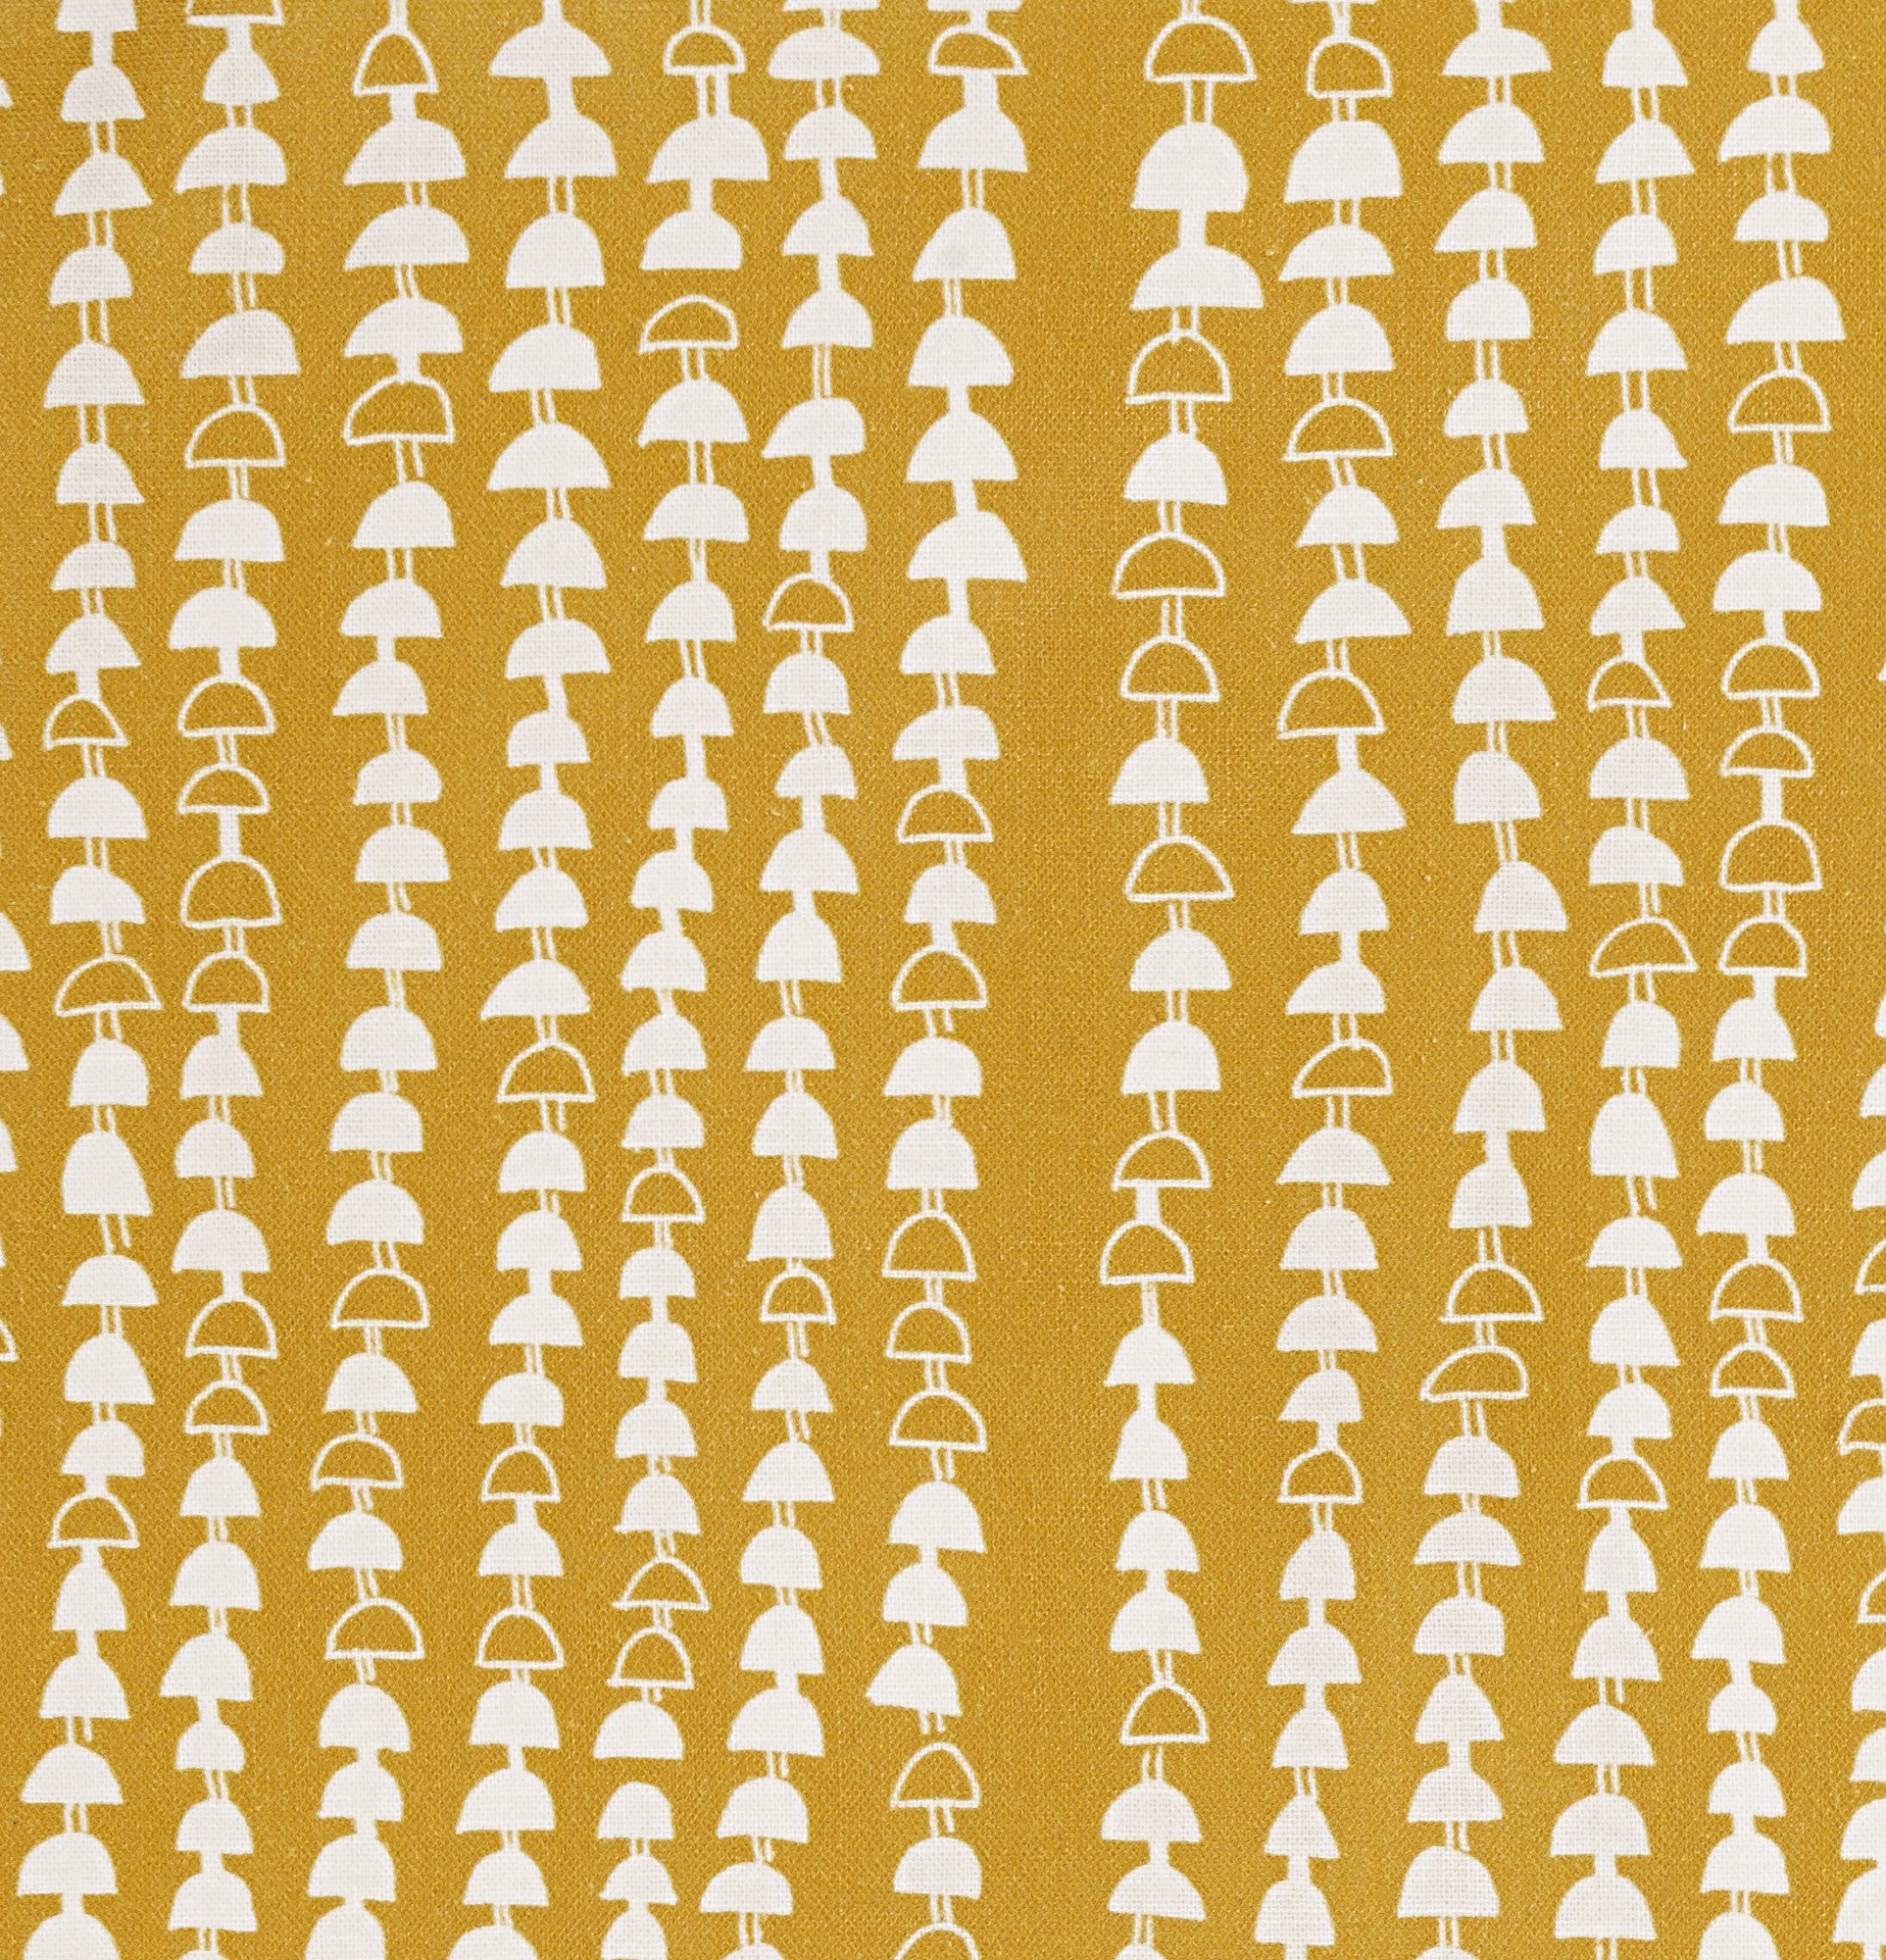 Hopi Graphic Strung Bead Pattern Linen Cotton Designer Home Decor Fabric for curtains, blinds, upholstery in Mustard Gold ships from Canada, USA